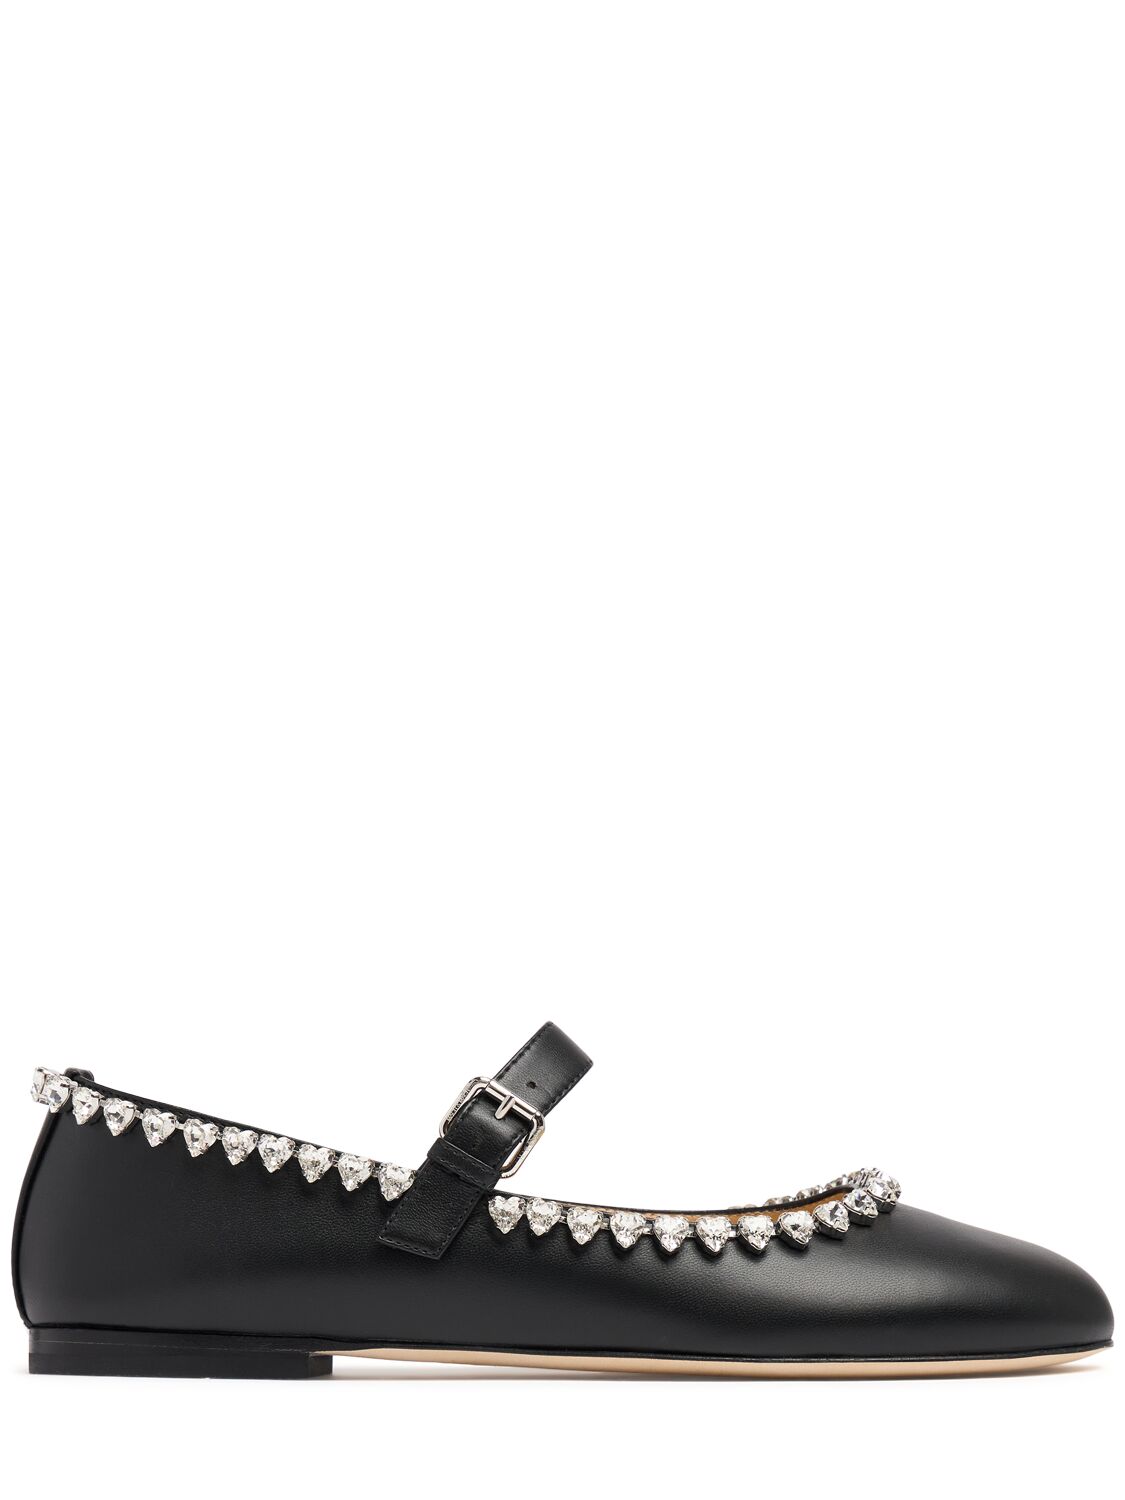 Mach & Mach 10mm Audrey Leather Mary Janes In Black